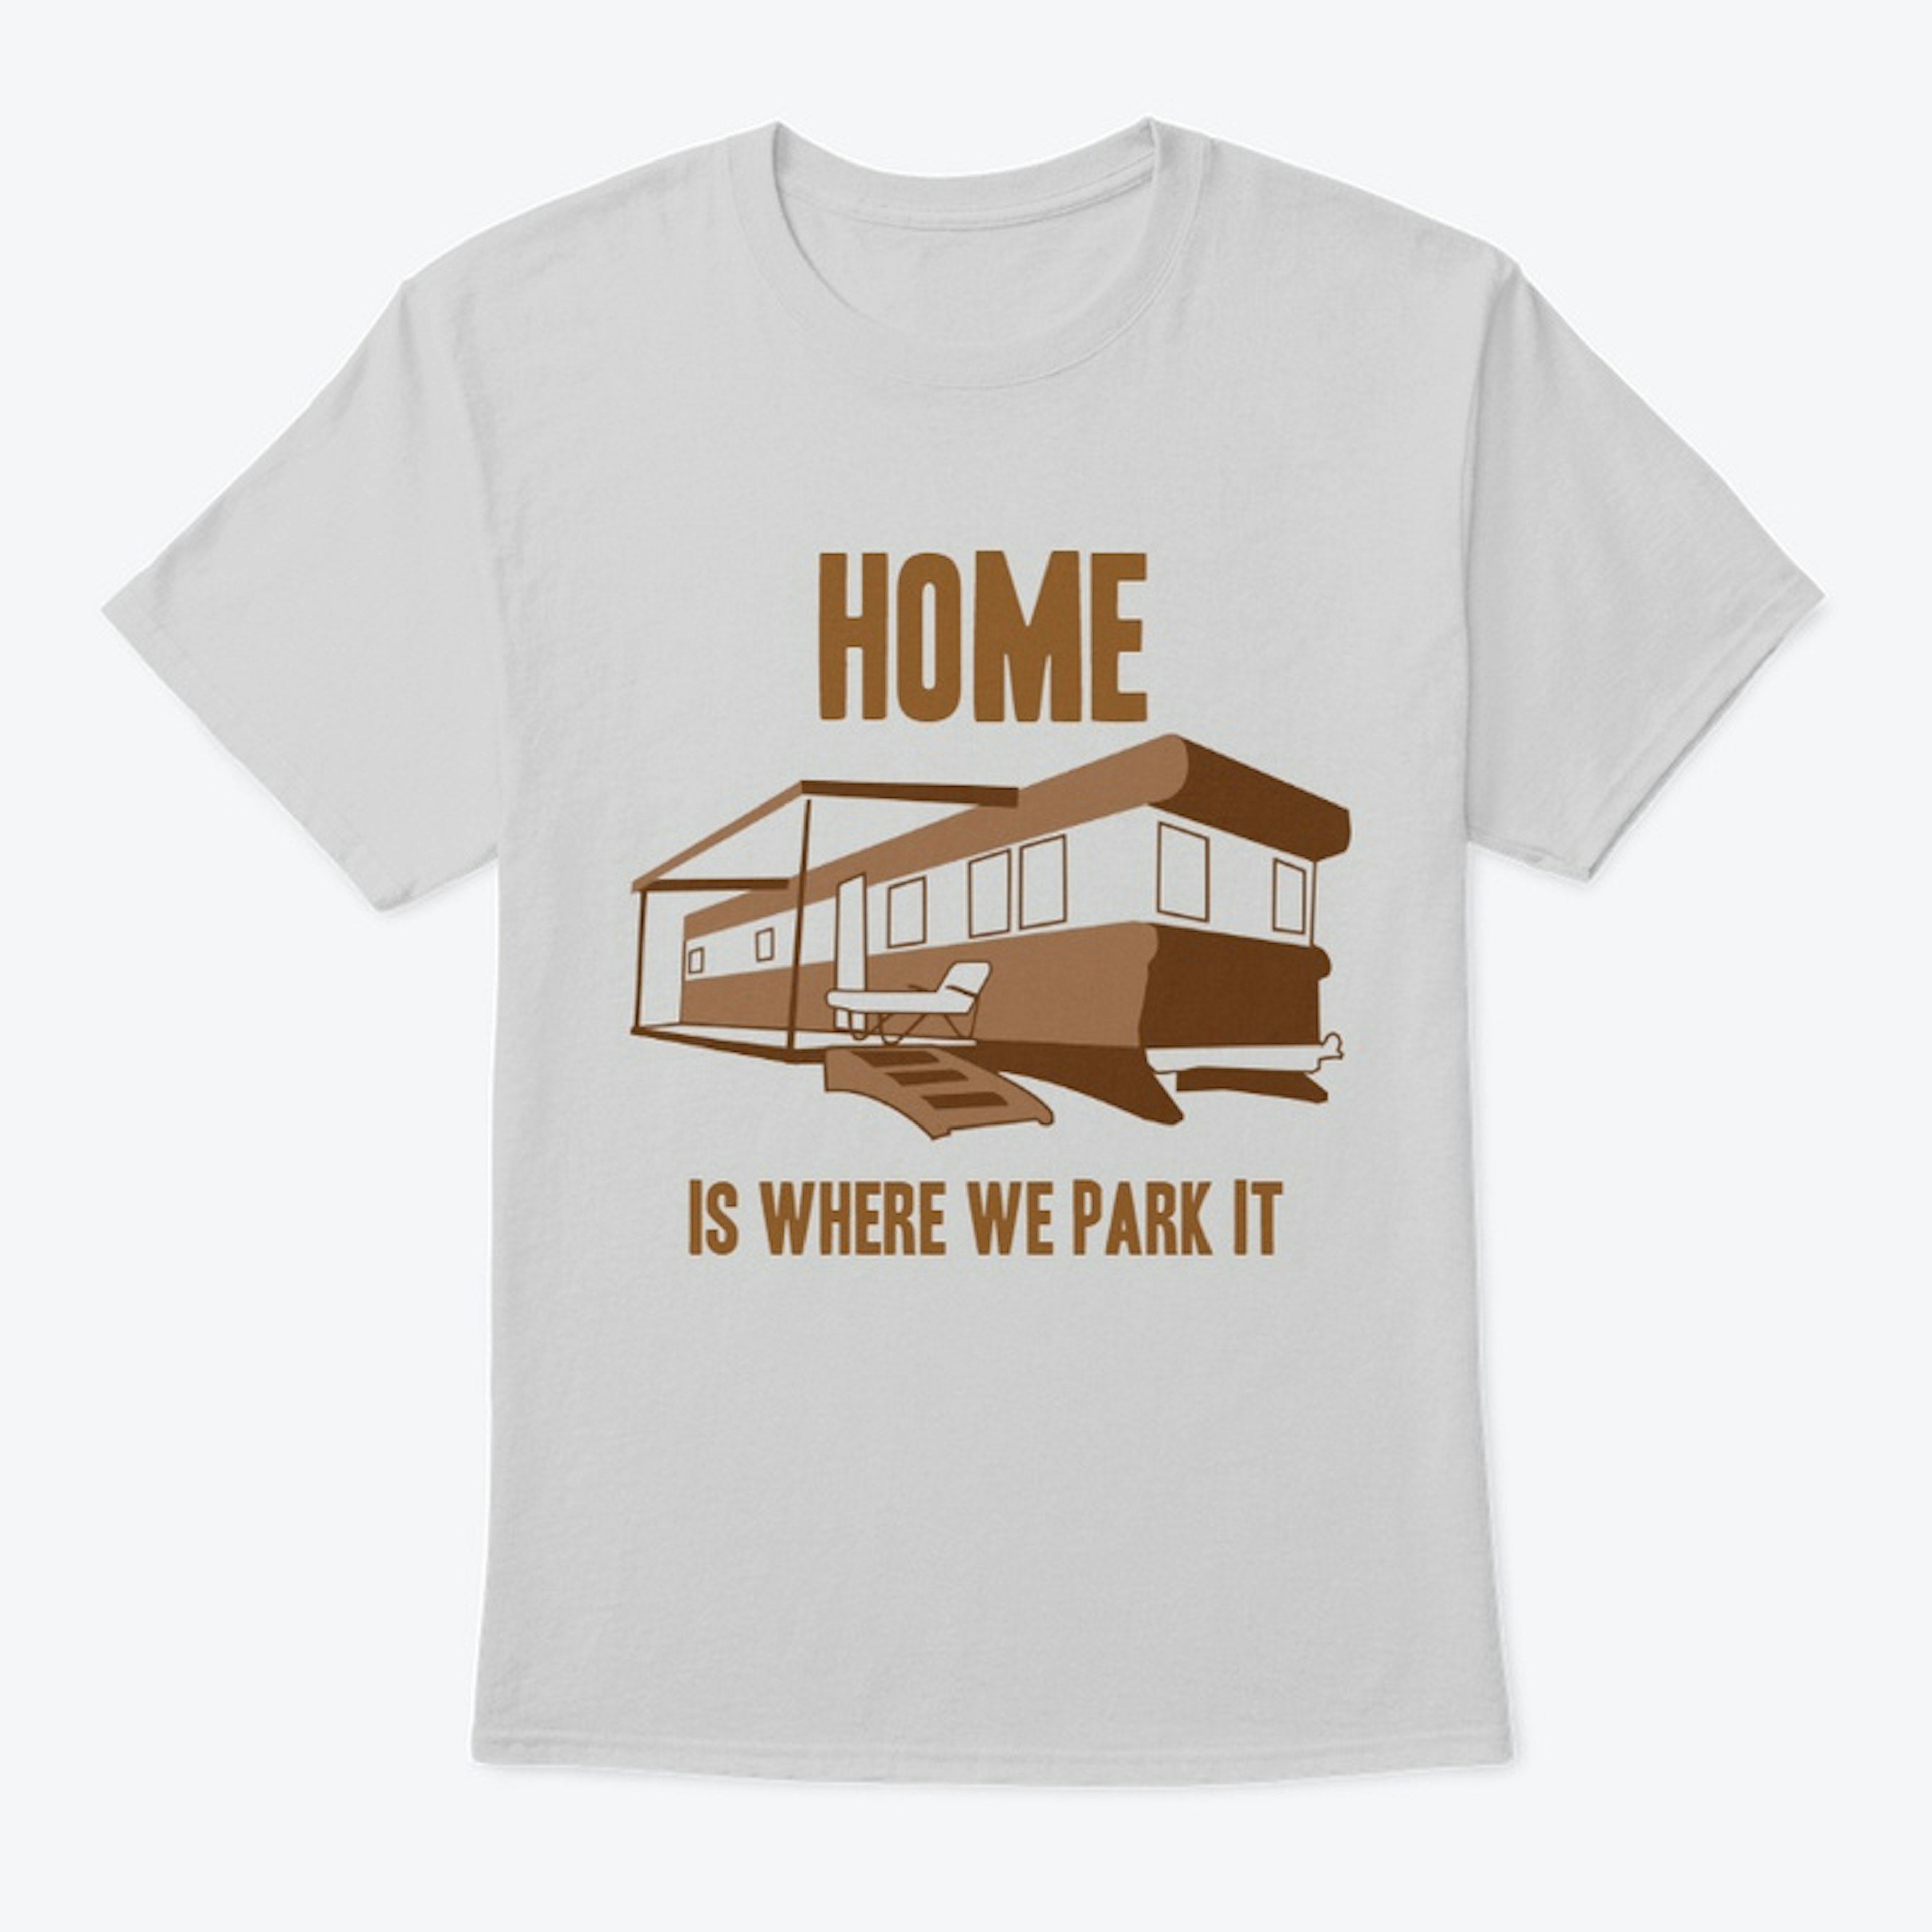 "Home is where we park it" logo t-shirt